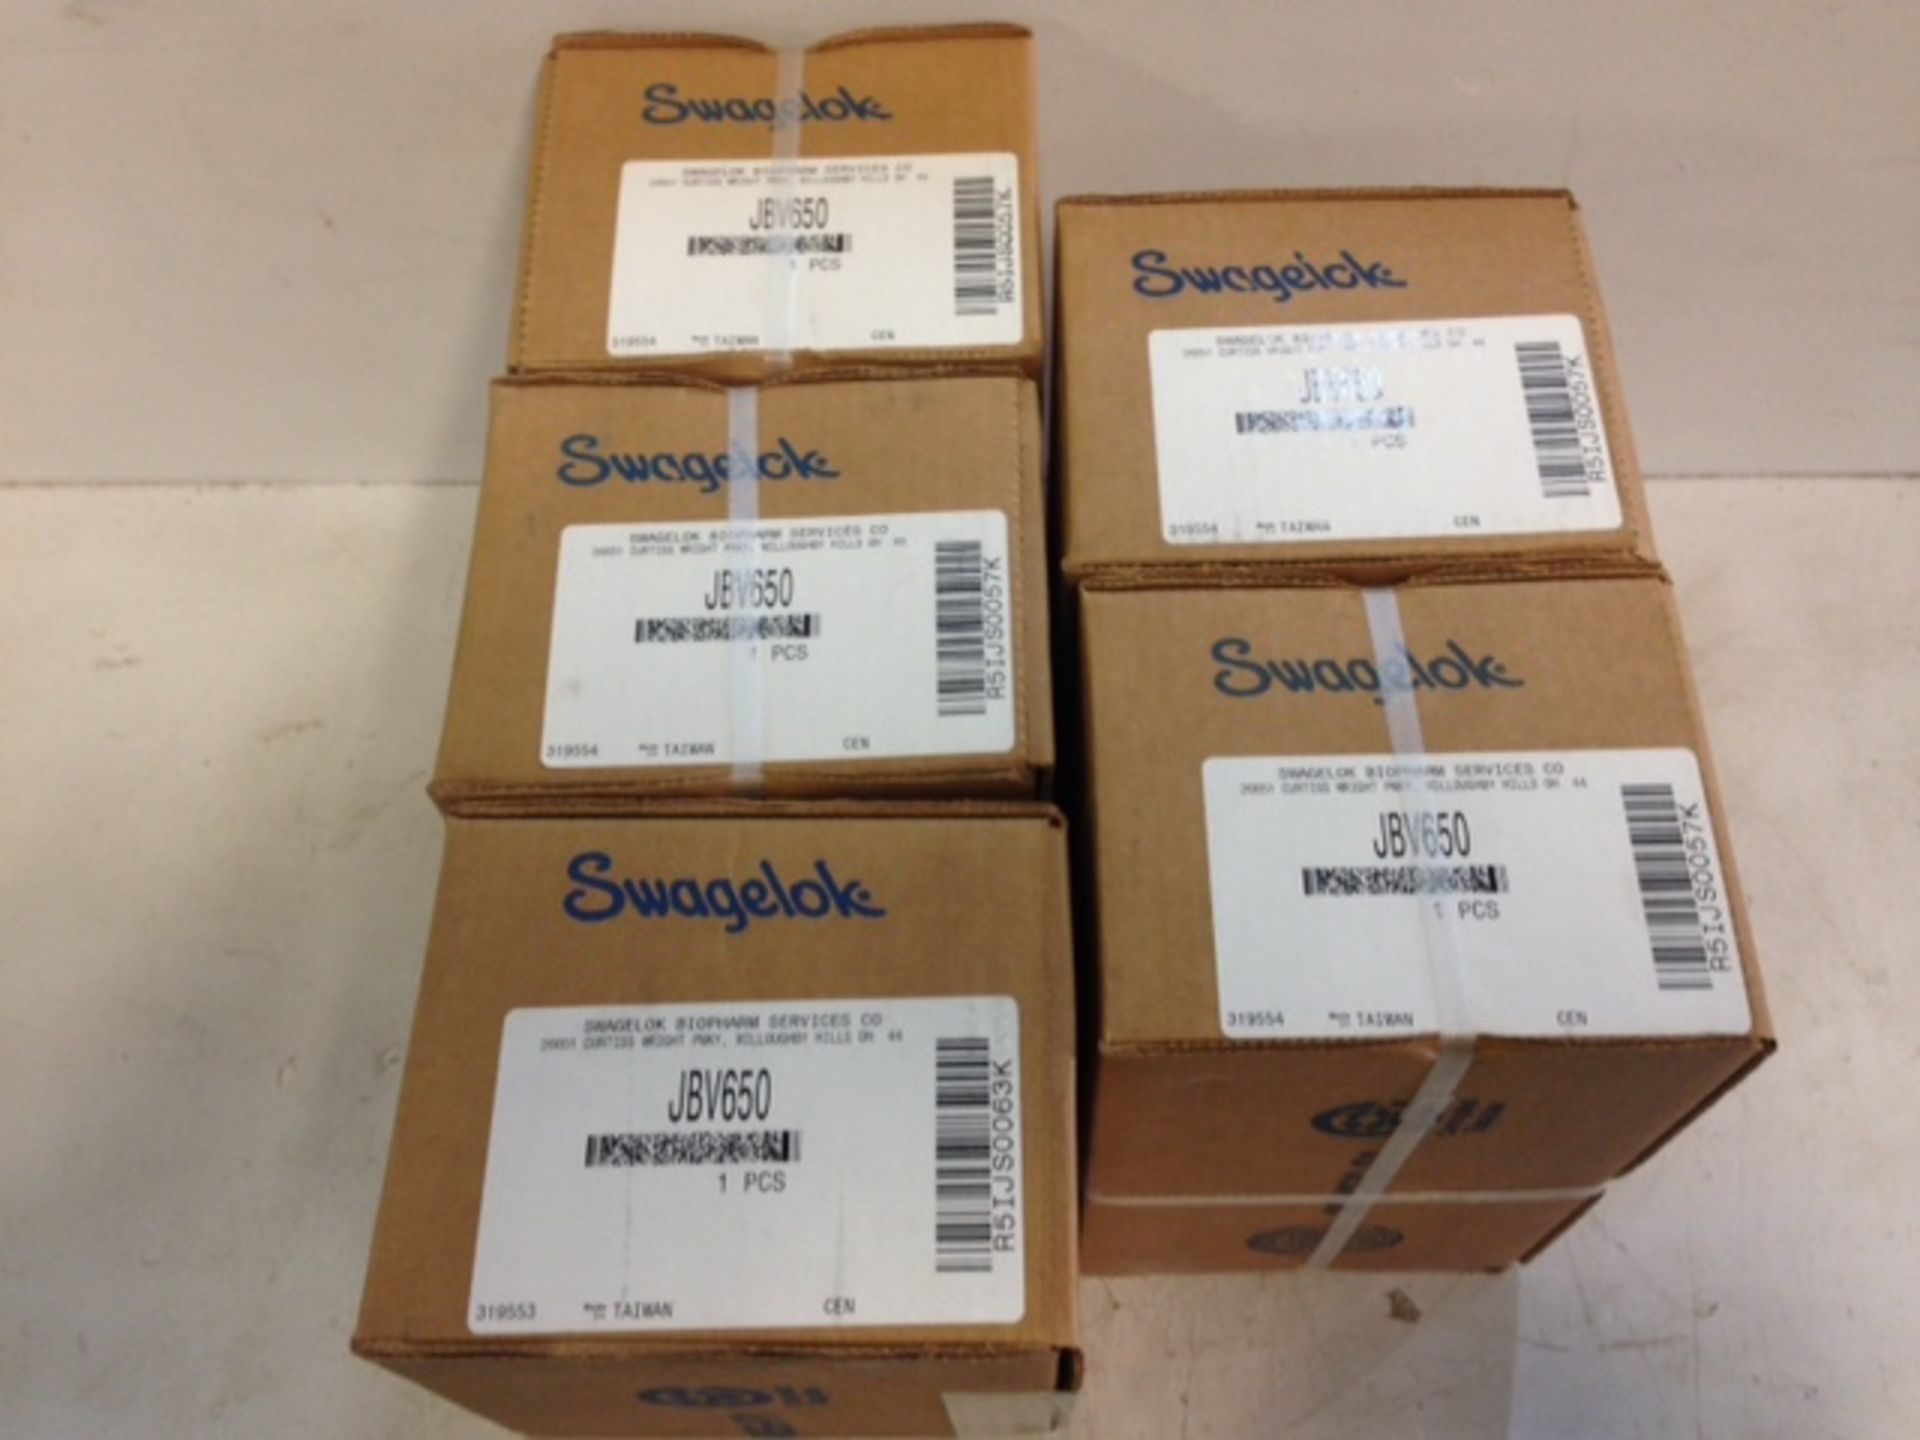 LOT OF 5 BOXES ONE IN EACH BOX SWAGELOK JBV-650 BALL VALVE